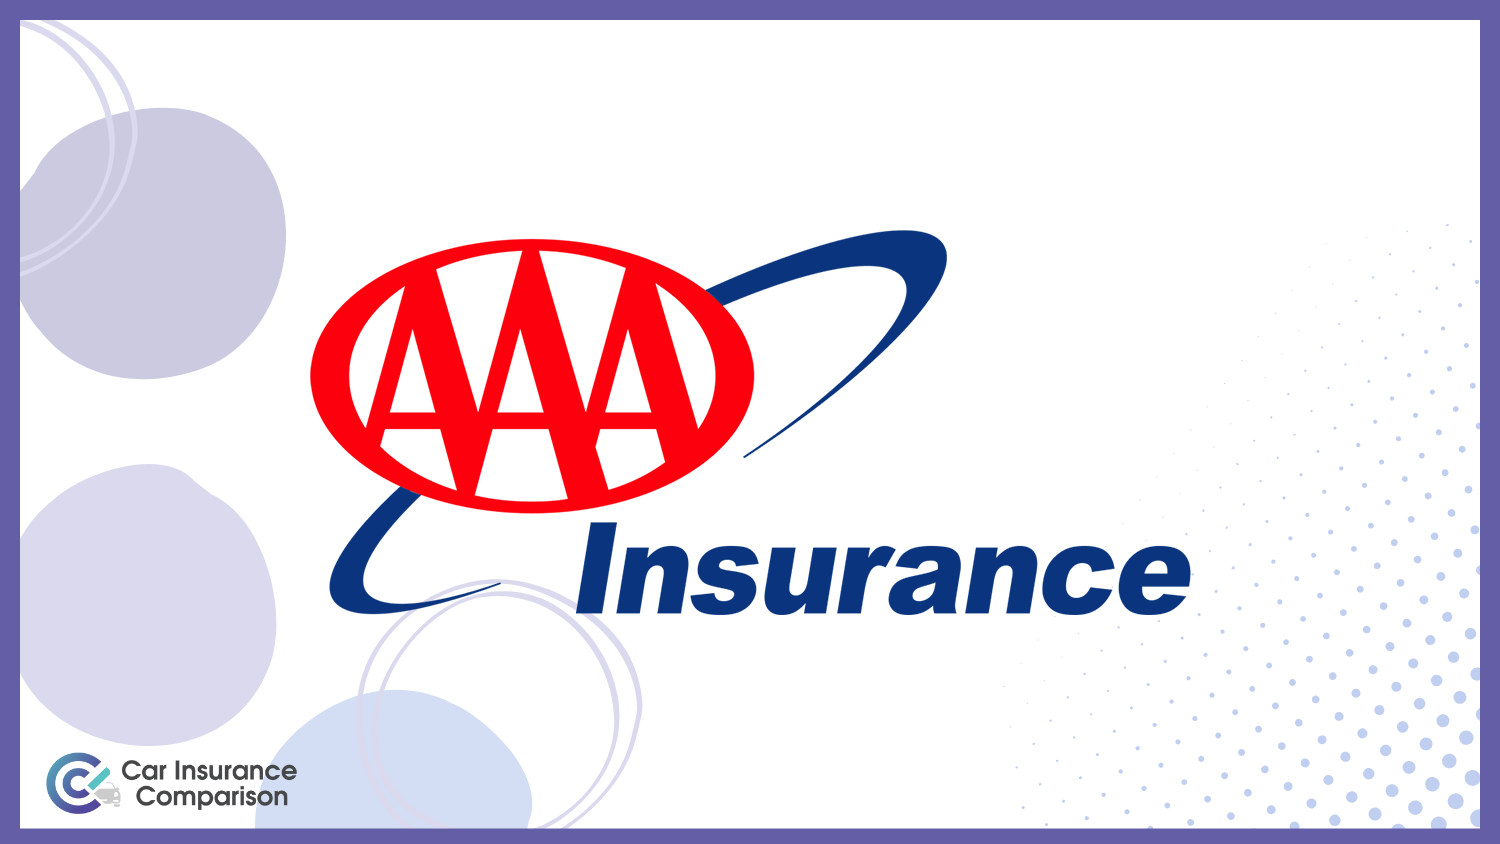 AAA: 10 Best Companies for Bundling Home and Car Insurance